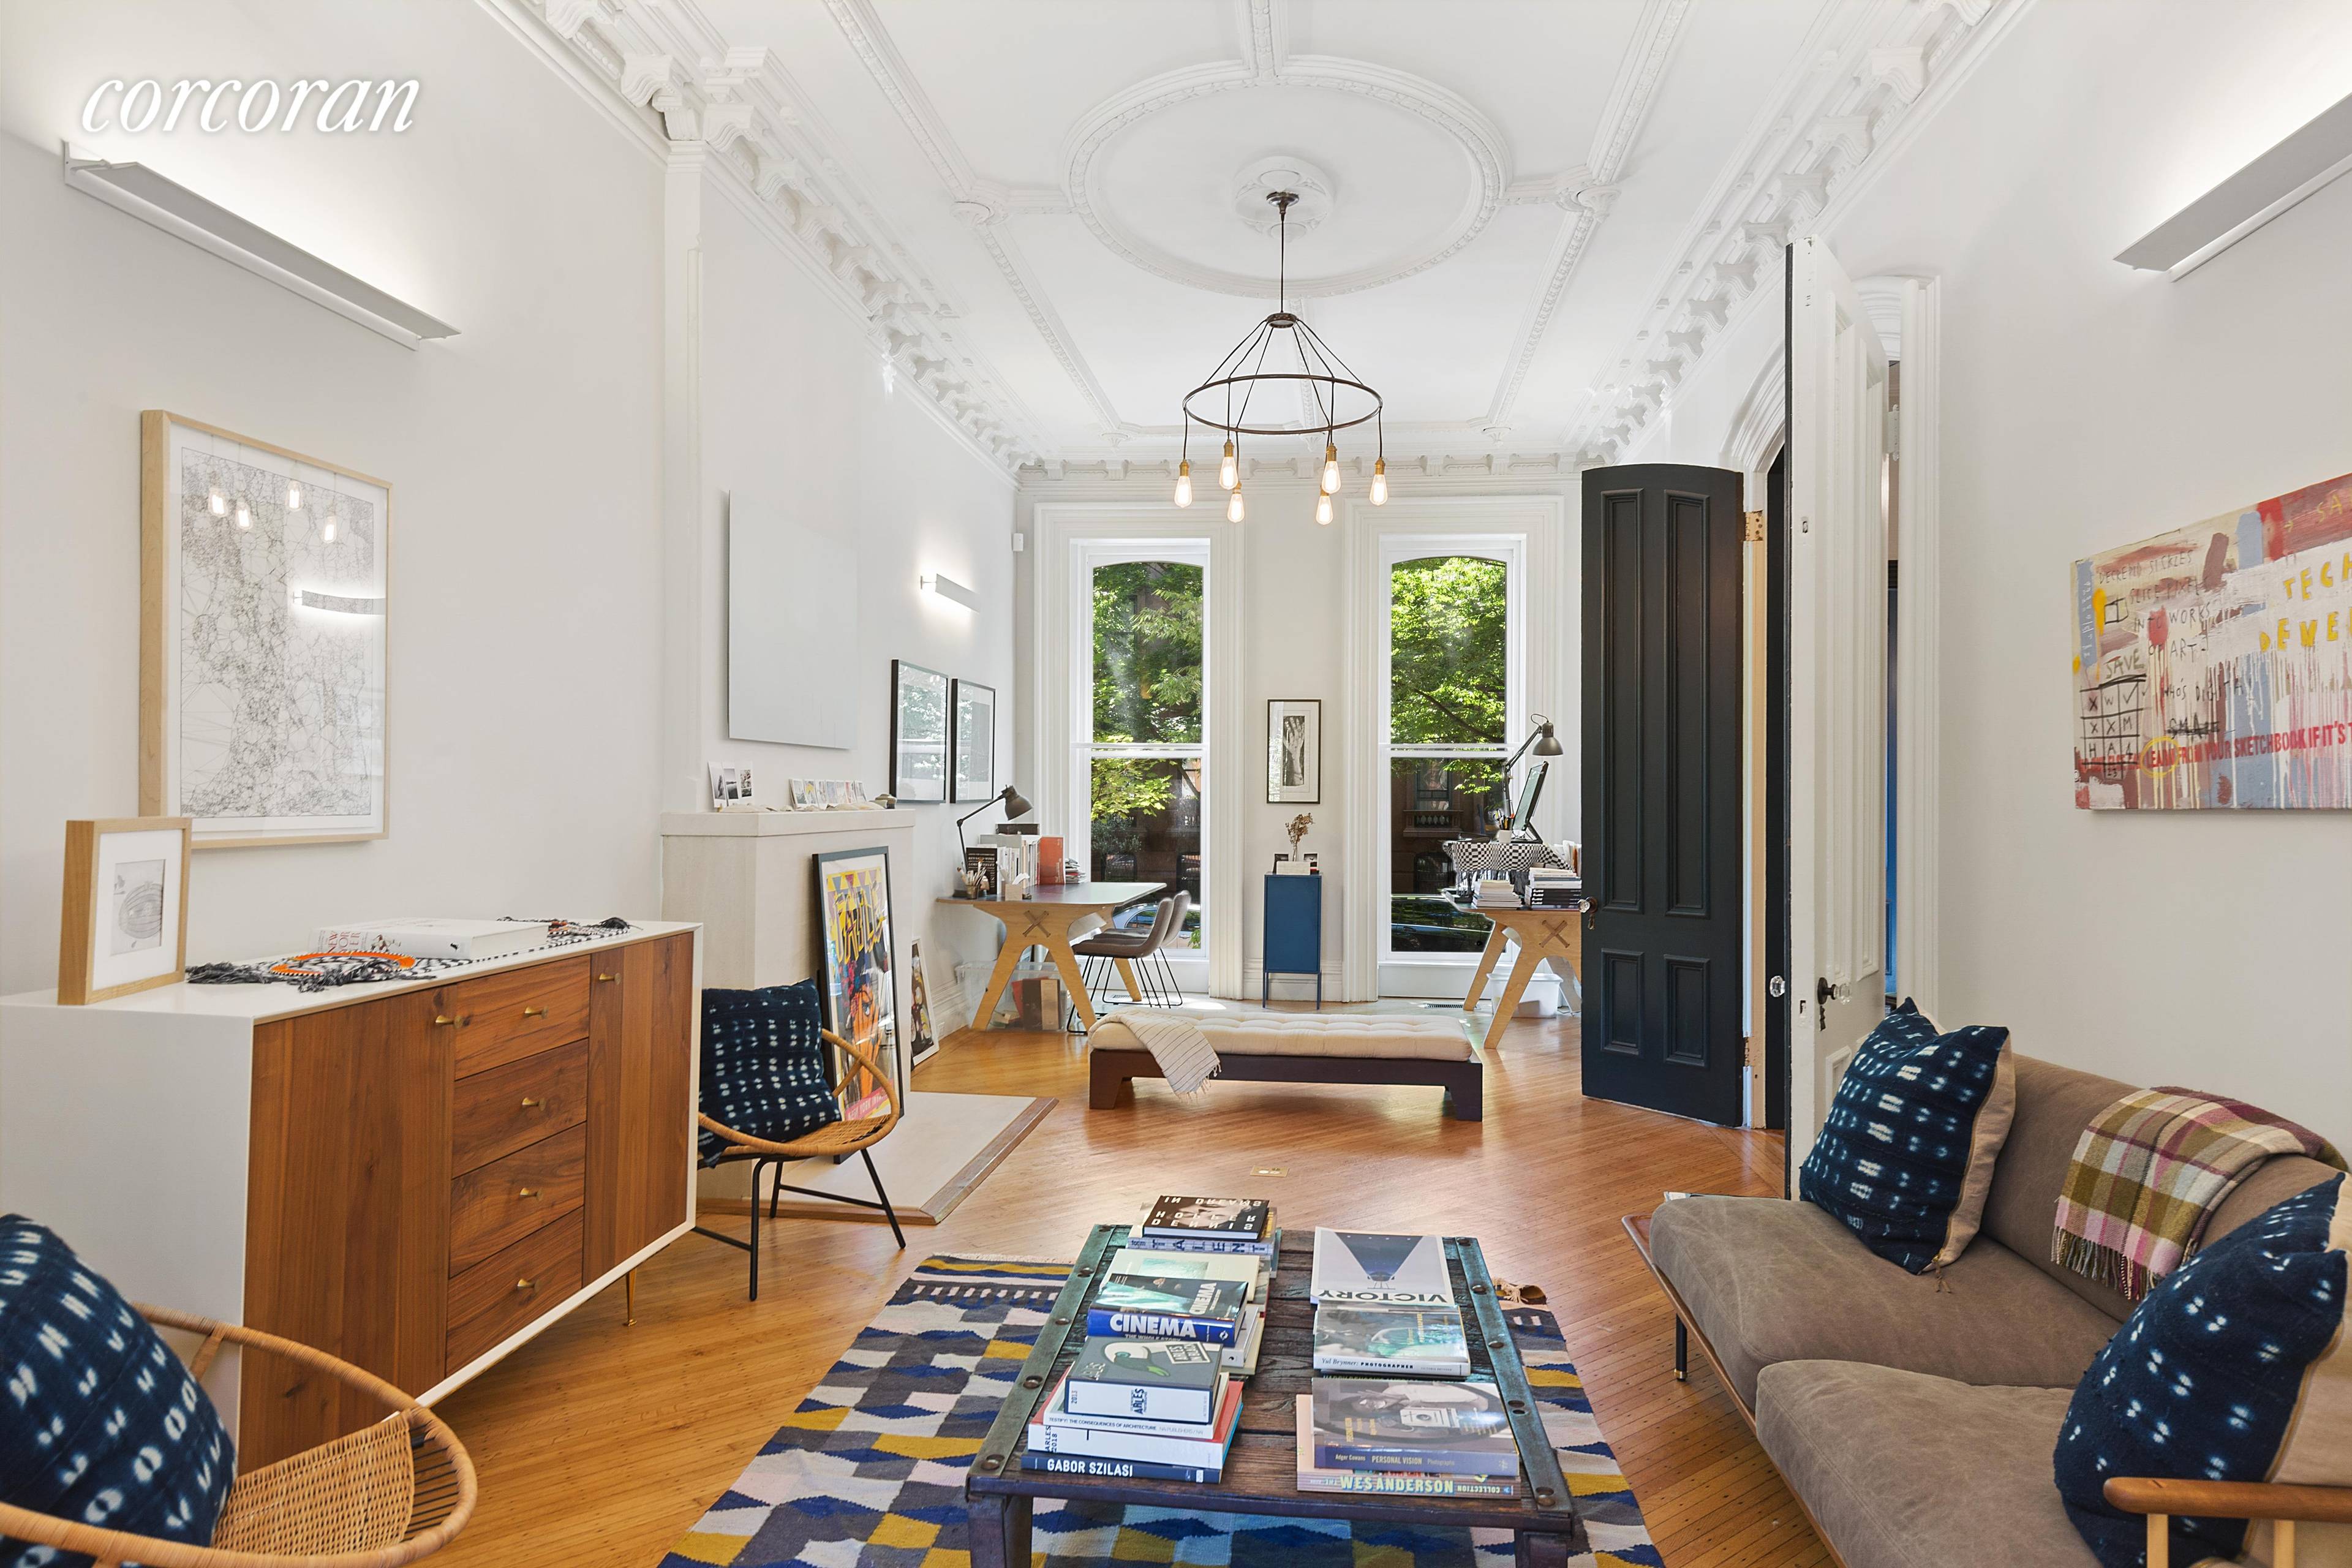 29 Cambridge Place represents one of the finest examples of a luxury historic townhouse in Clinton Hill completely renovated and designed for today's lifestyle.